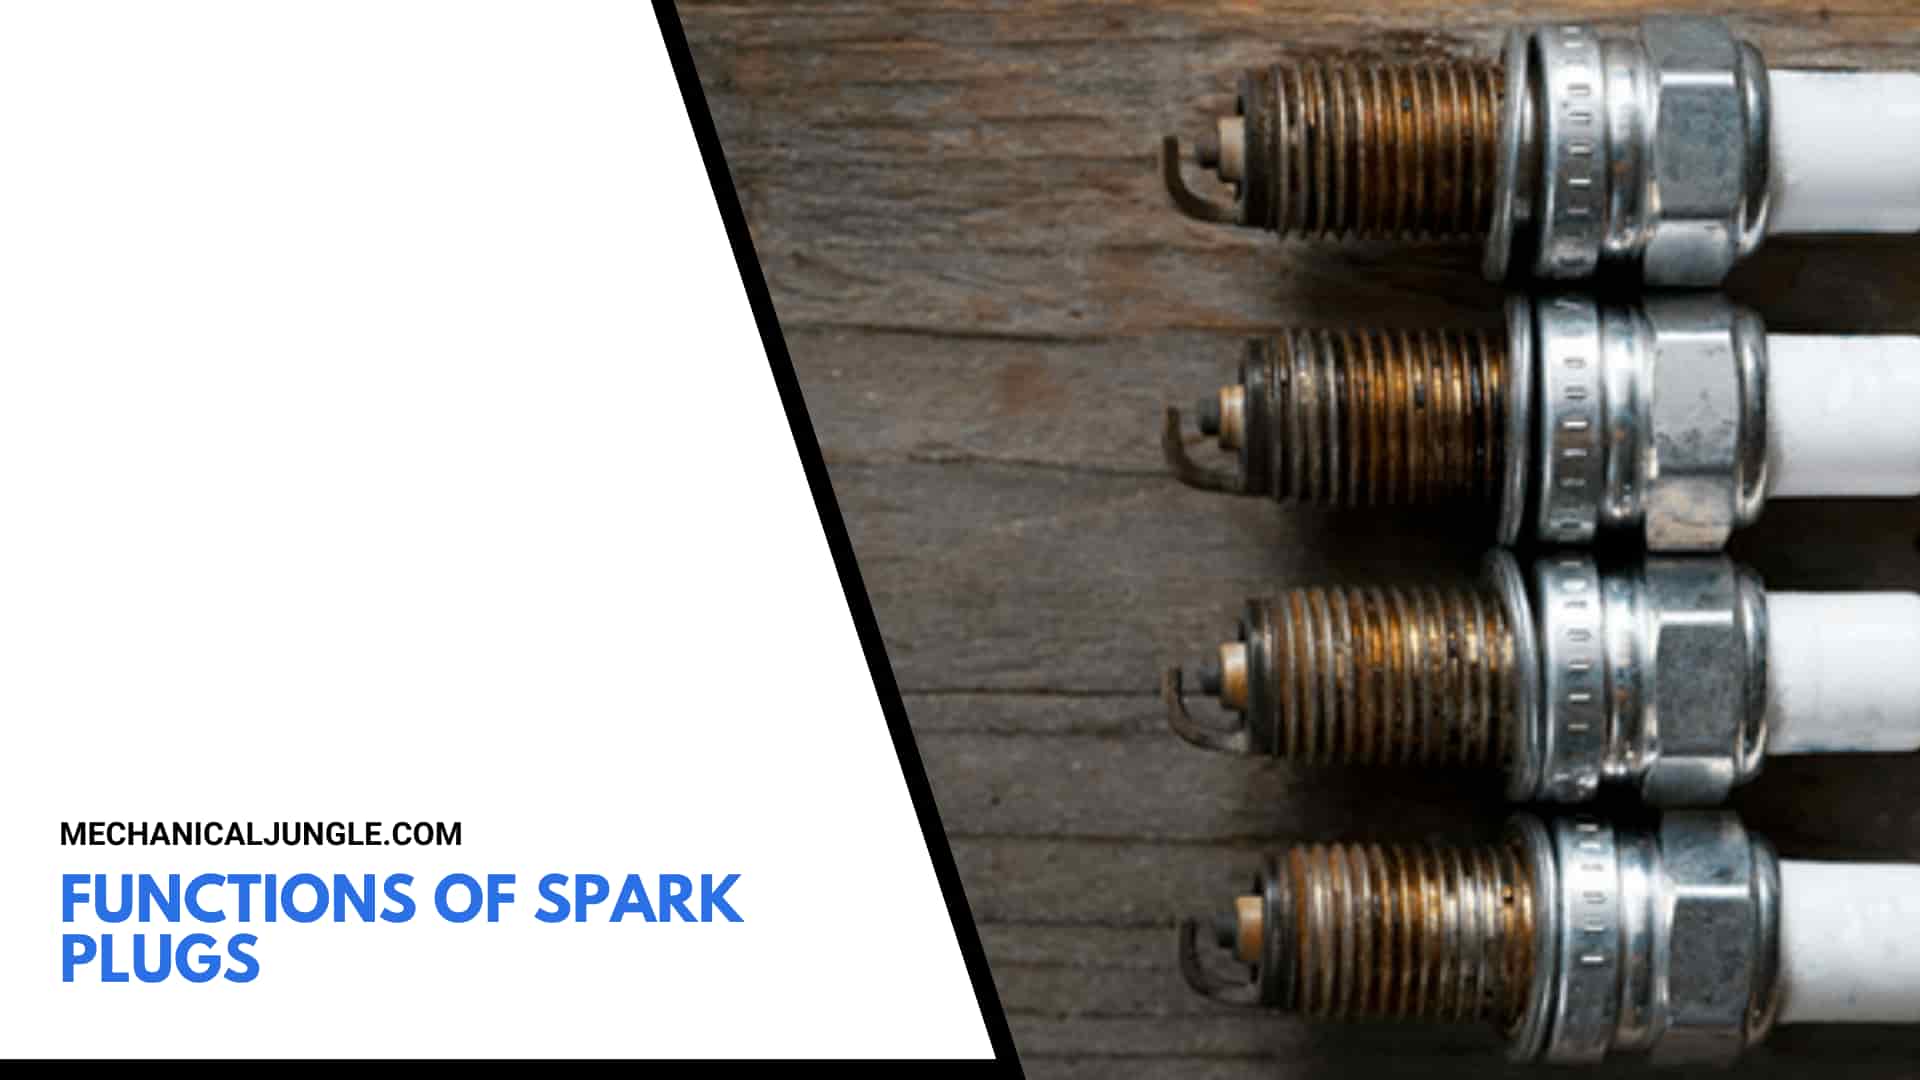 Functions of Spark Plugs